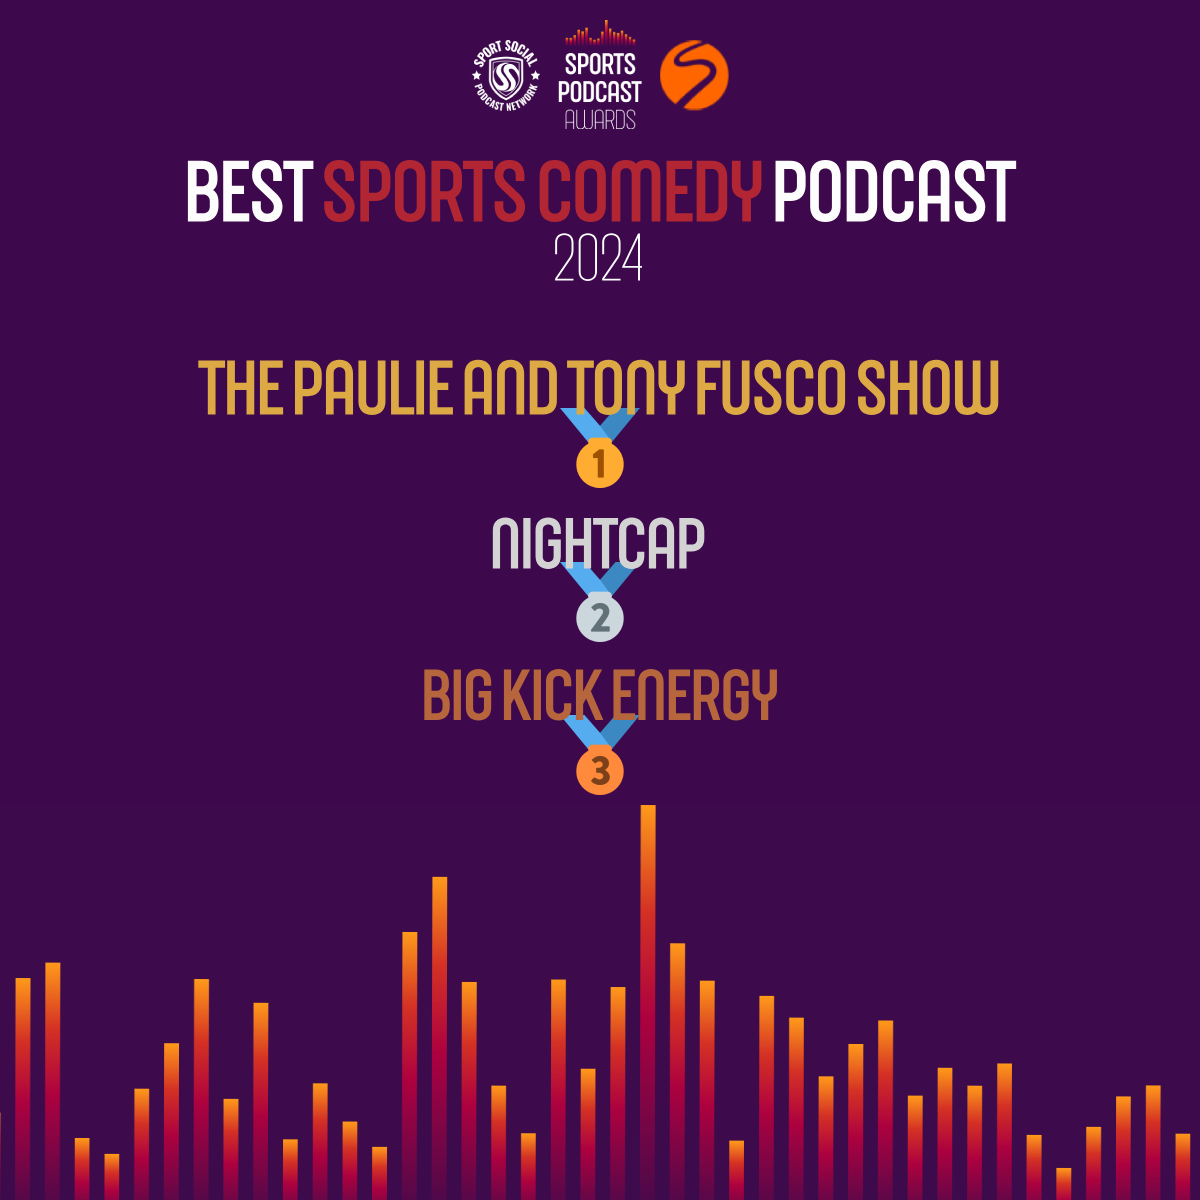 🏆🎭 All your winners of the Best Sports Comedy Podcast awards together are… 🥇 The Paulie and Tony Fusco Show @TheFuscoShow 🥈 Nightcap @NightcapShow_ 🥉 BIG KICK ENERGY @MaisieAdam @suziruffell 👏